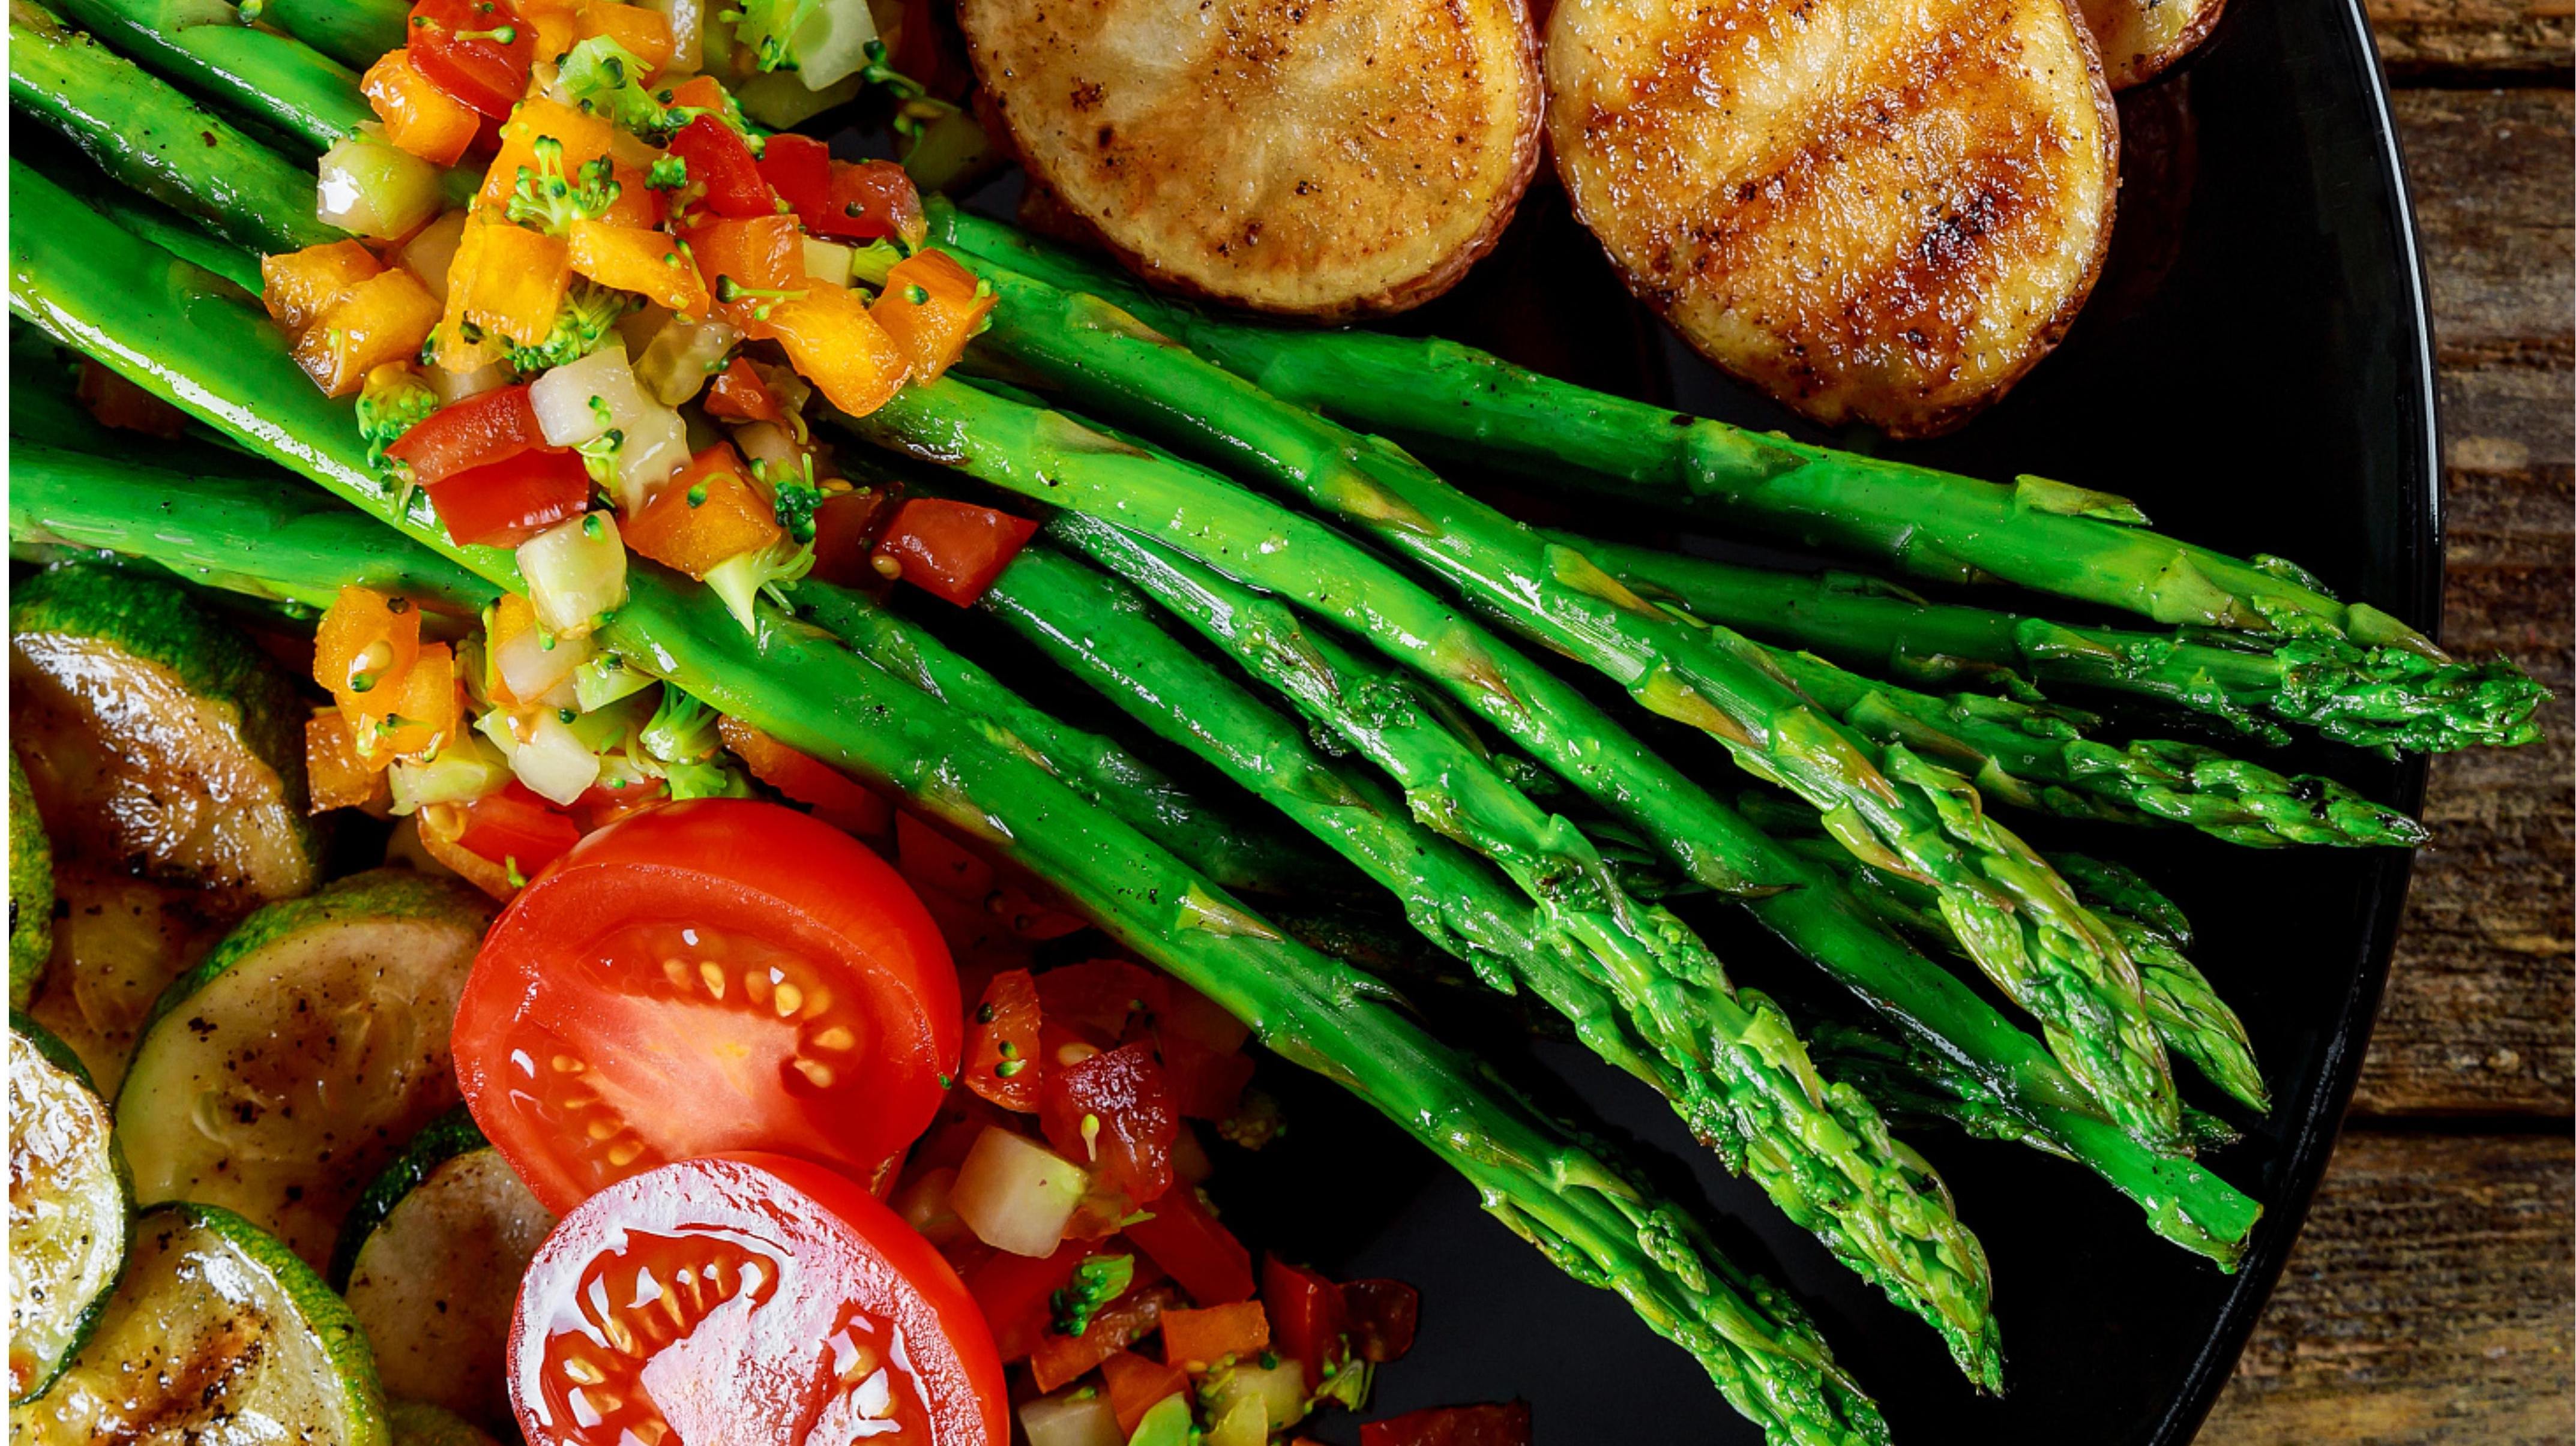 From crispy bell peppers to tender asparagus, the X&E Smokeless Grill allows you to achieve restaurant-quality grilled vegetables in the comfort of your own home.